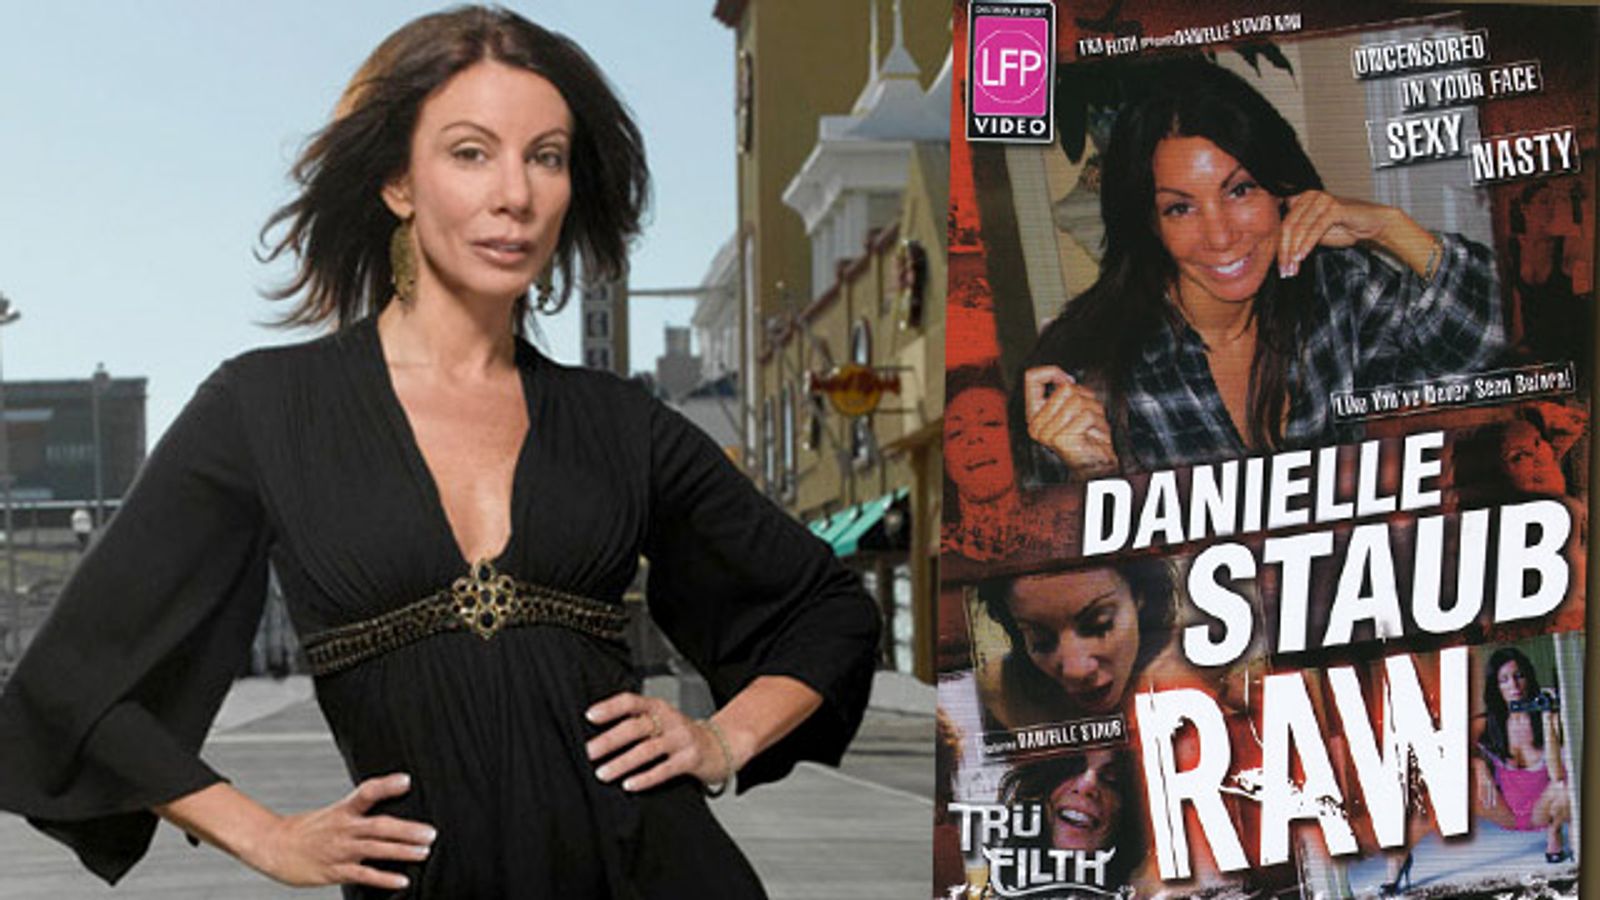 Who's Bad-Mouthing the Danielle Staub DVD?